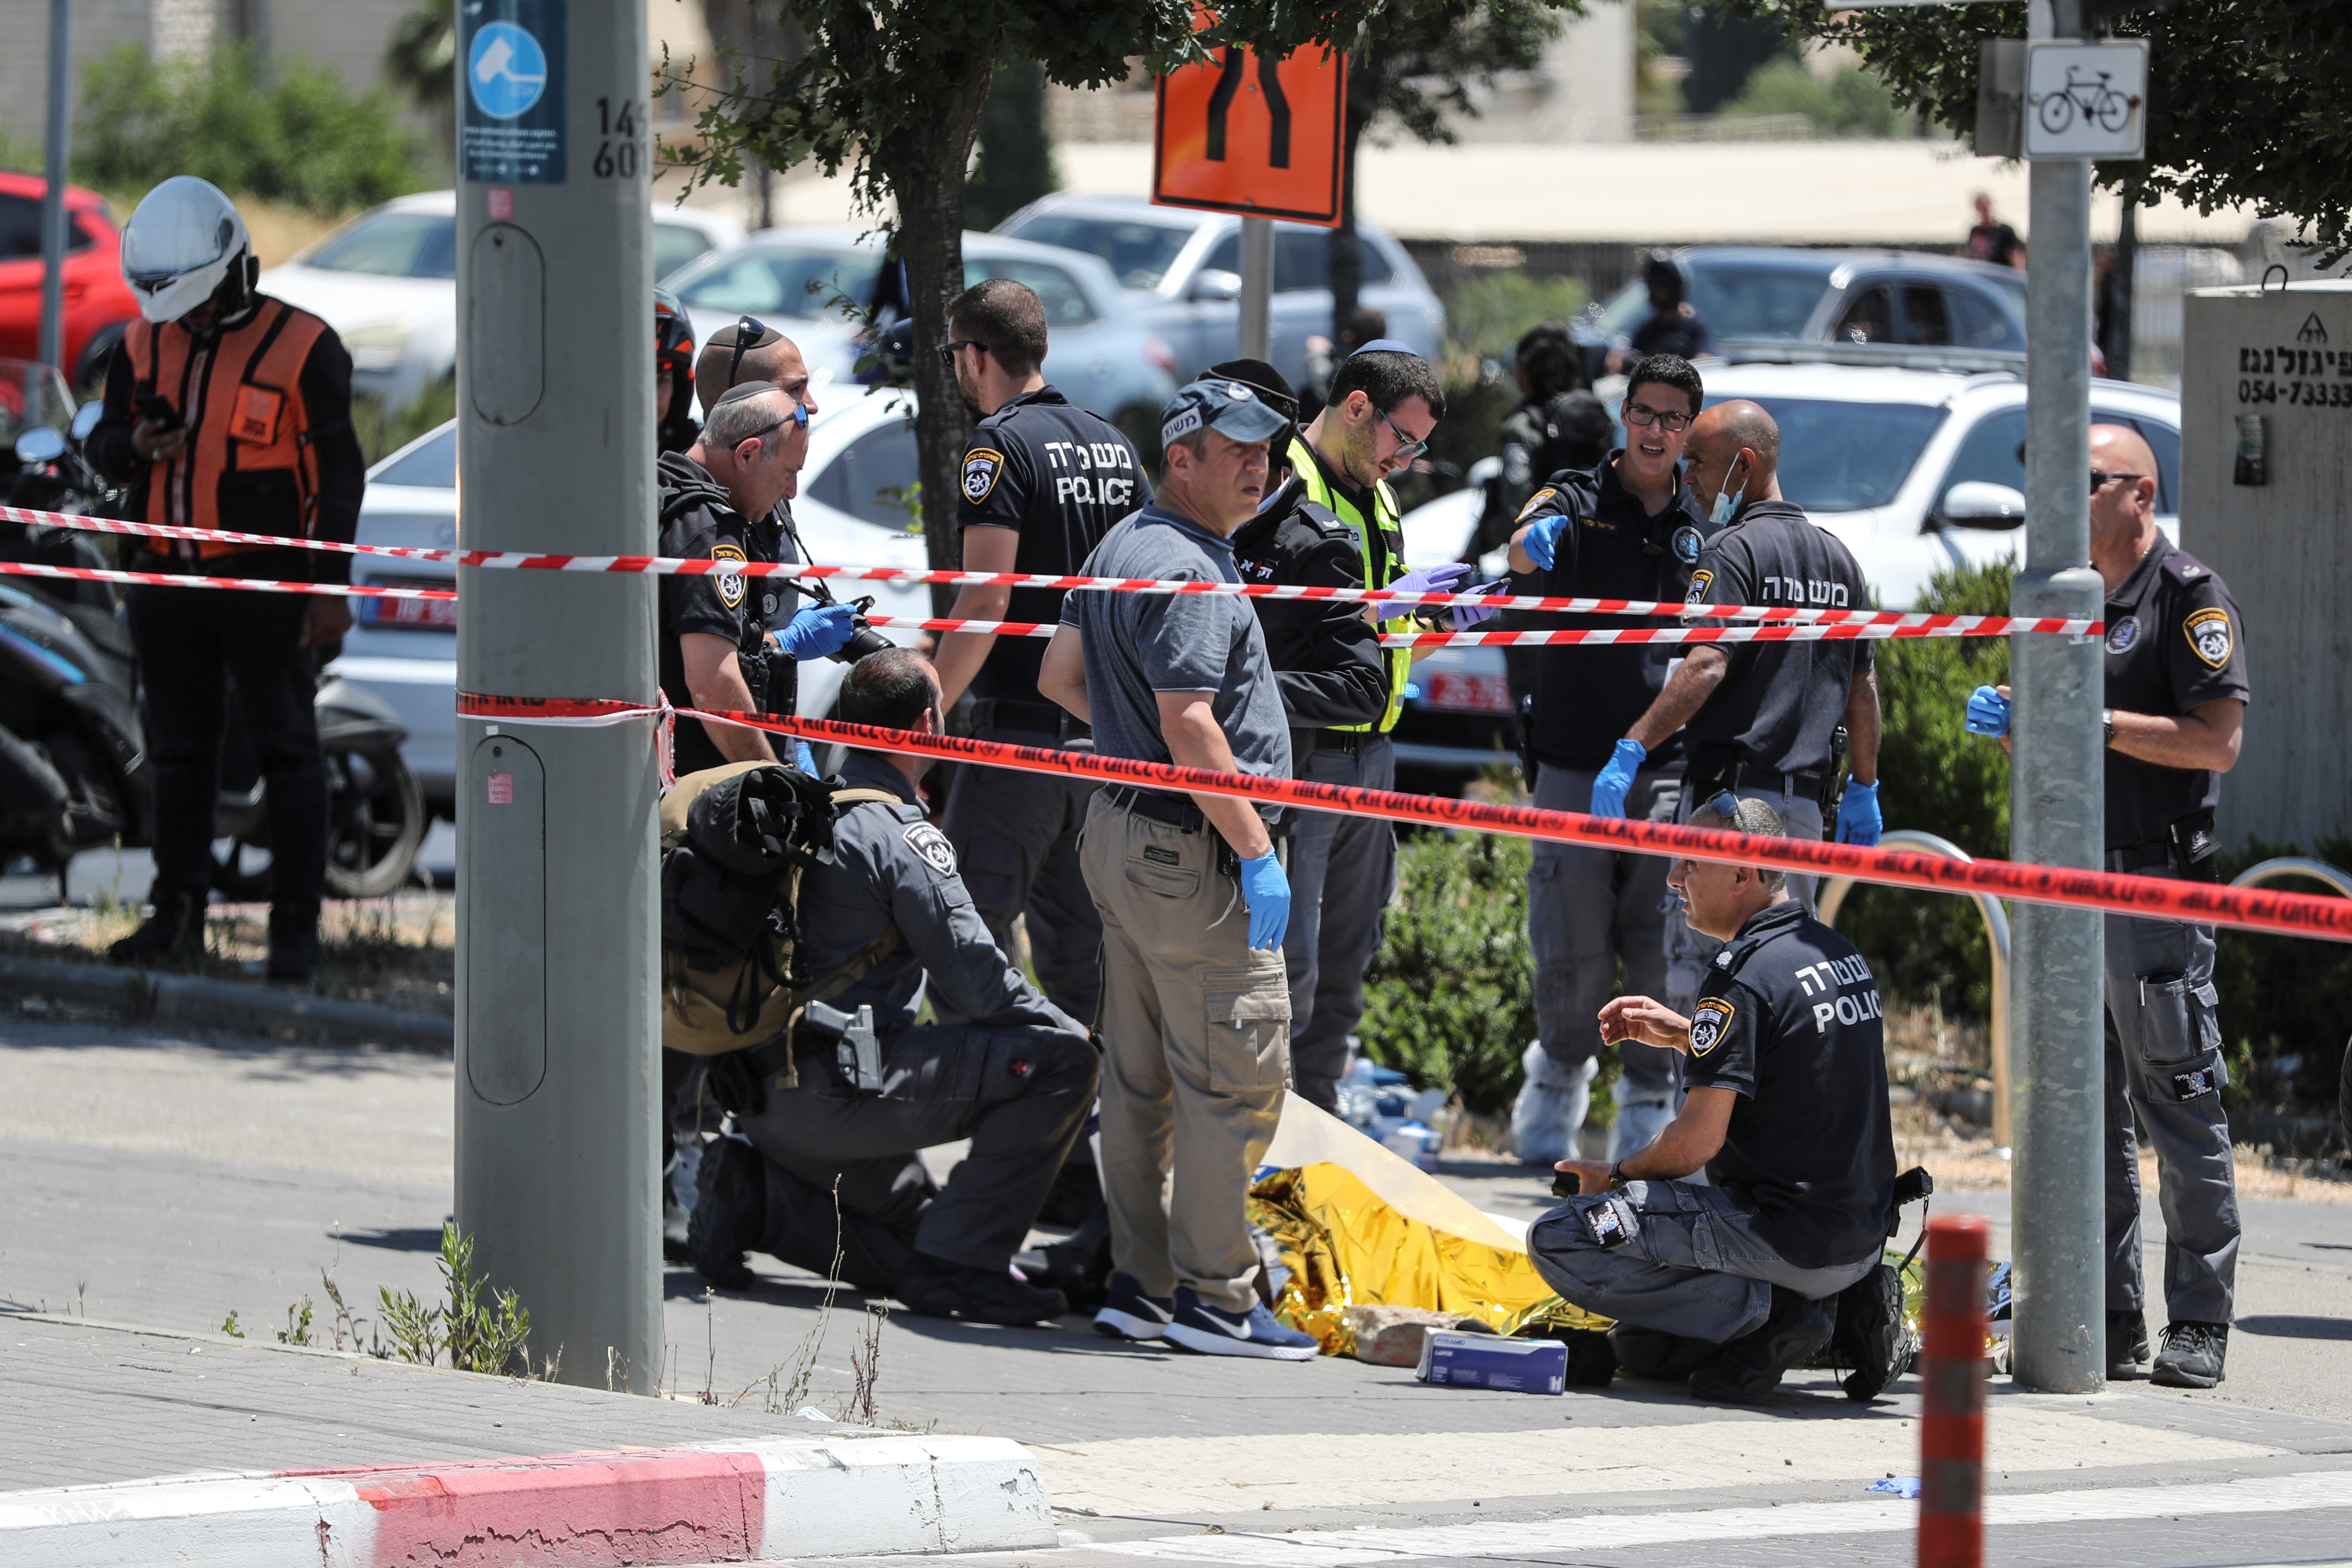 Israeli security and emergency personnel work at the scene of an incident in Jerusalem